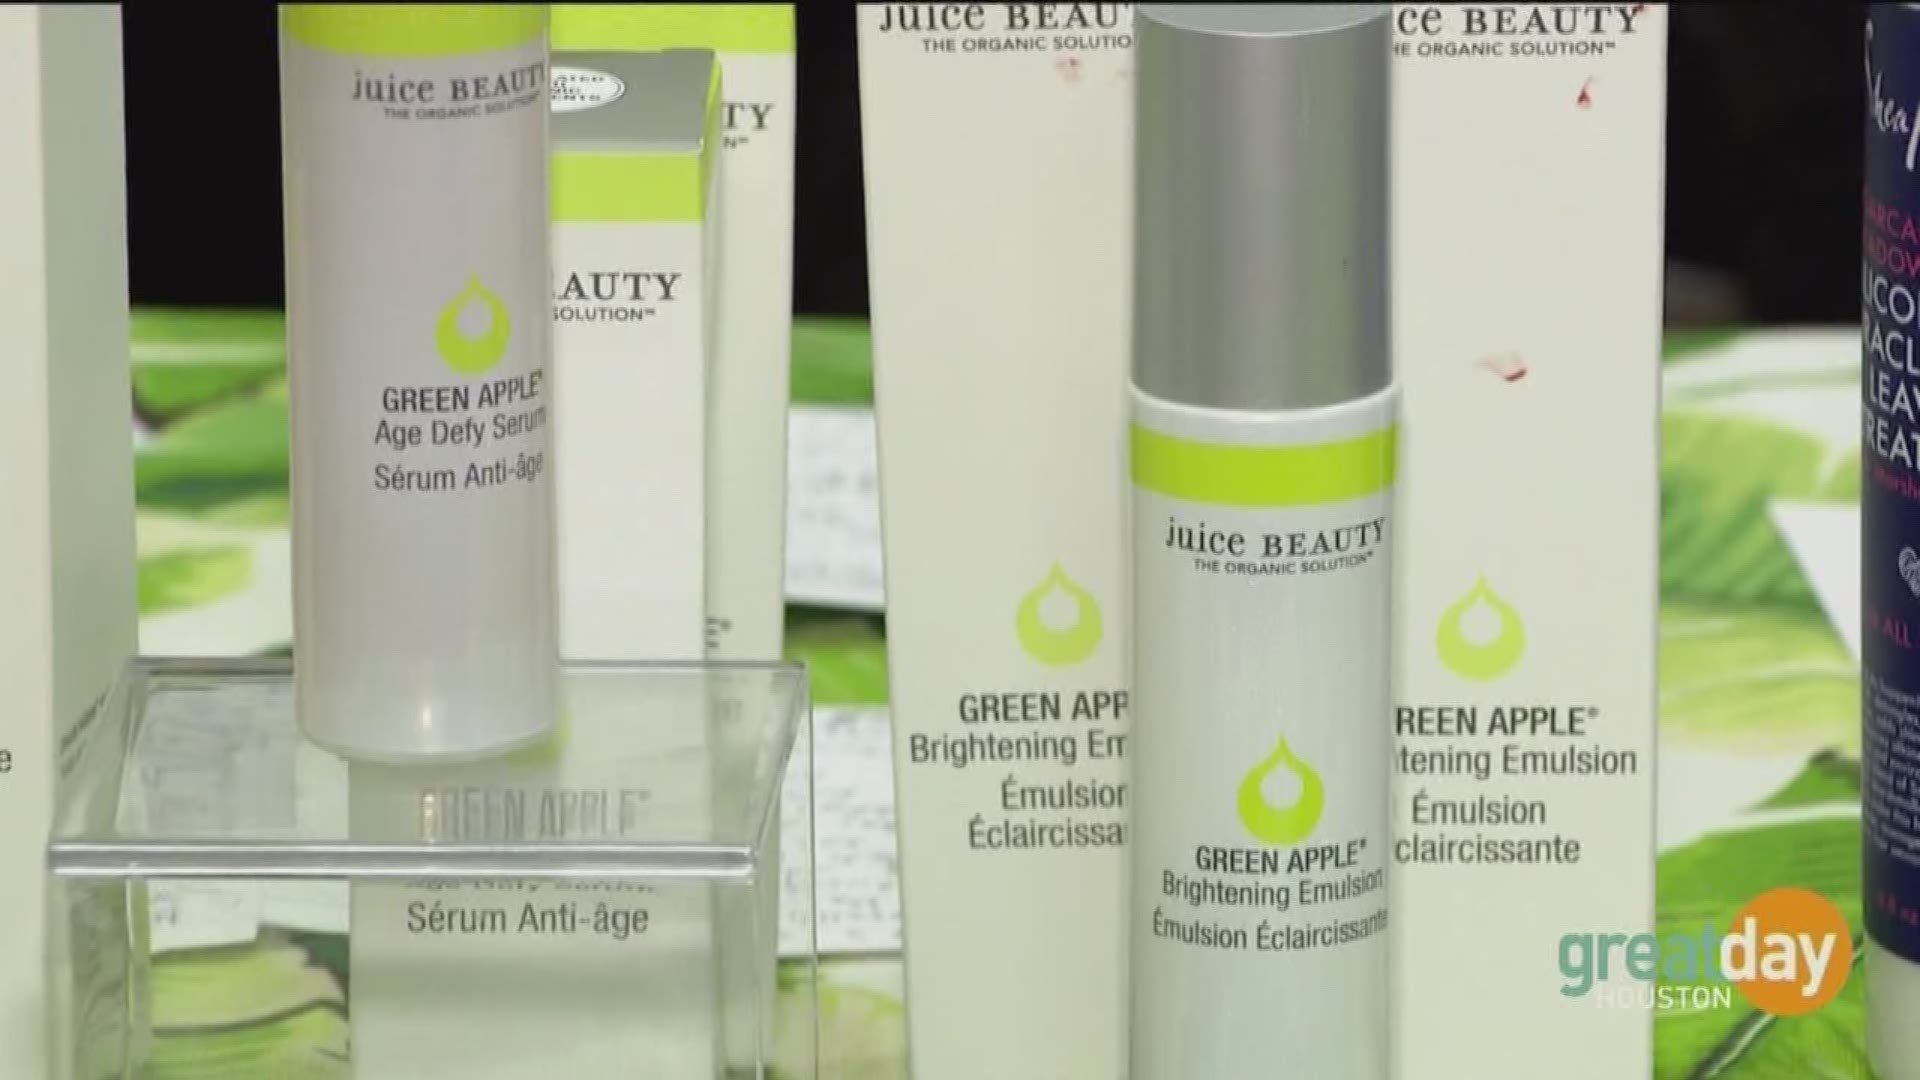 Great Day's Cristina puts eco-friendly beauty products to the test in honor of Earth Day!   